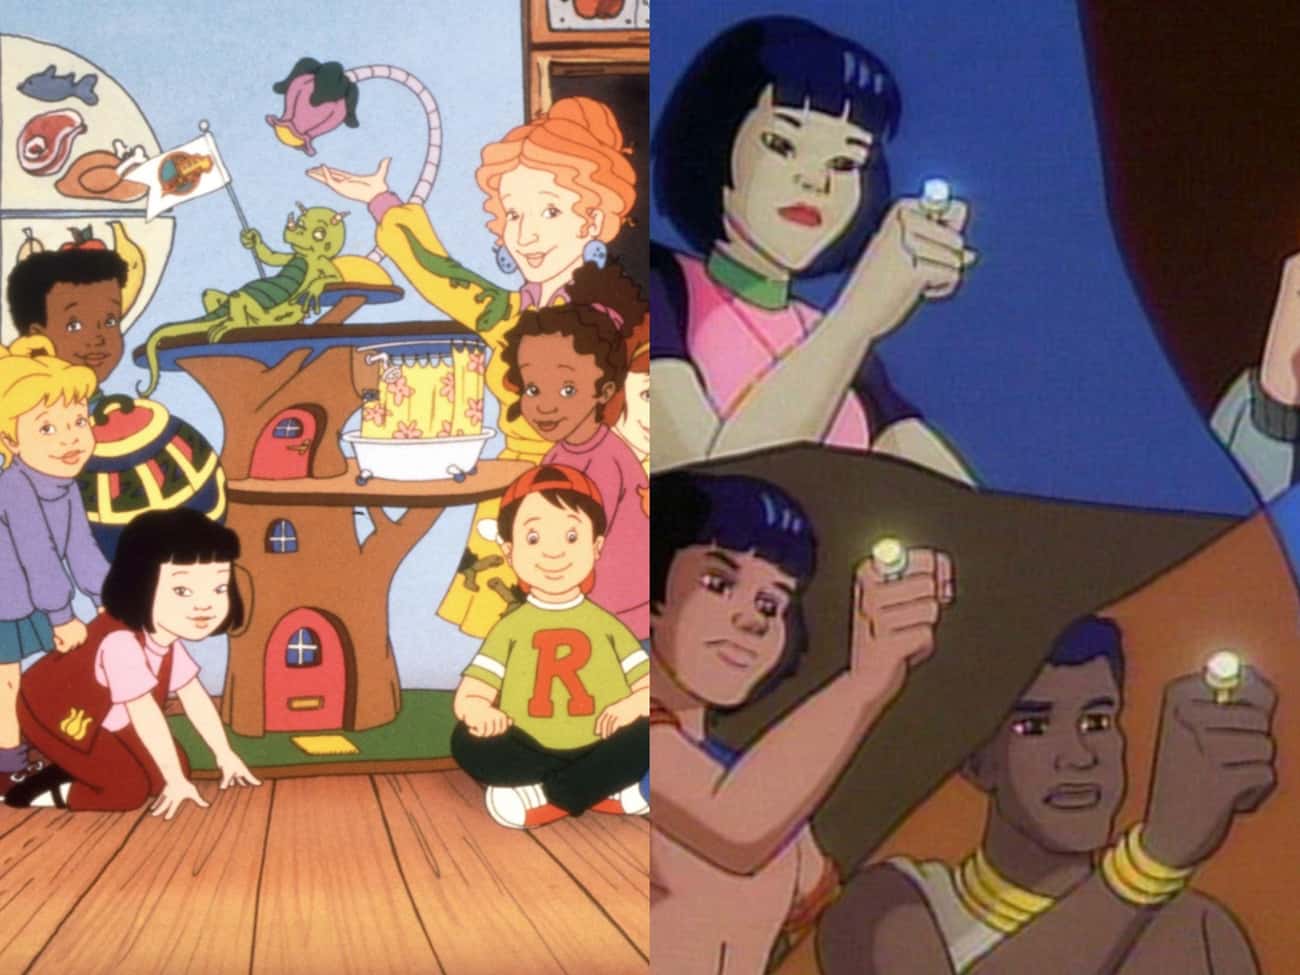 The Kids From 'The Magic School Bus' Grew Up To Be The Planeteers